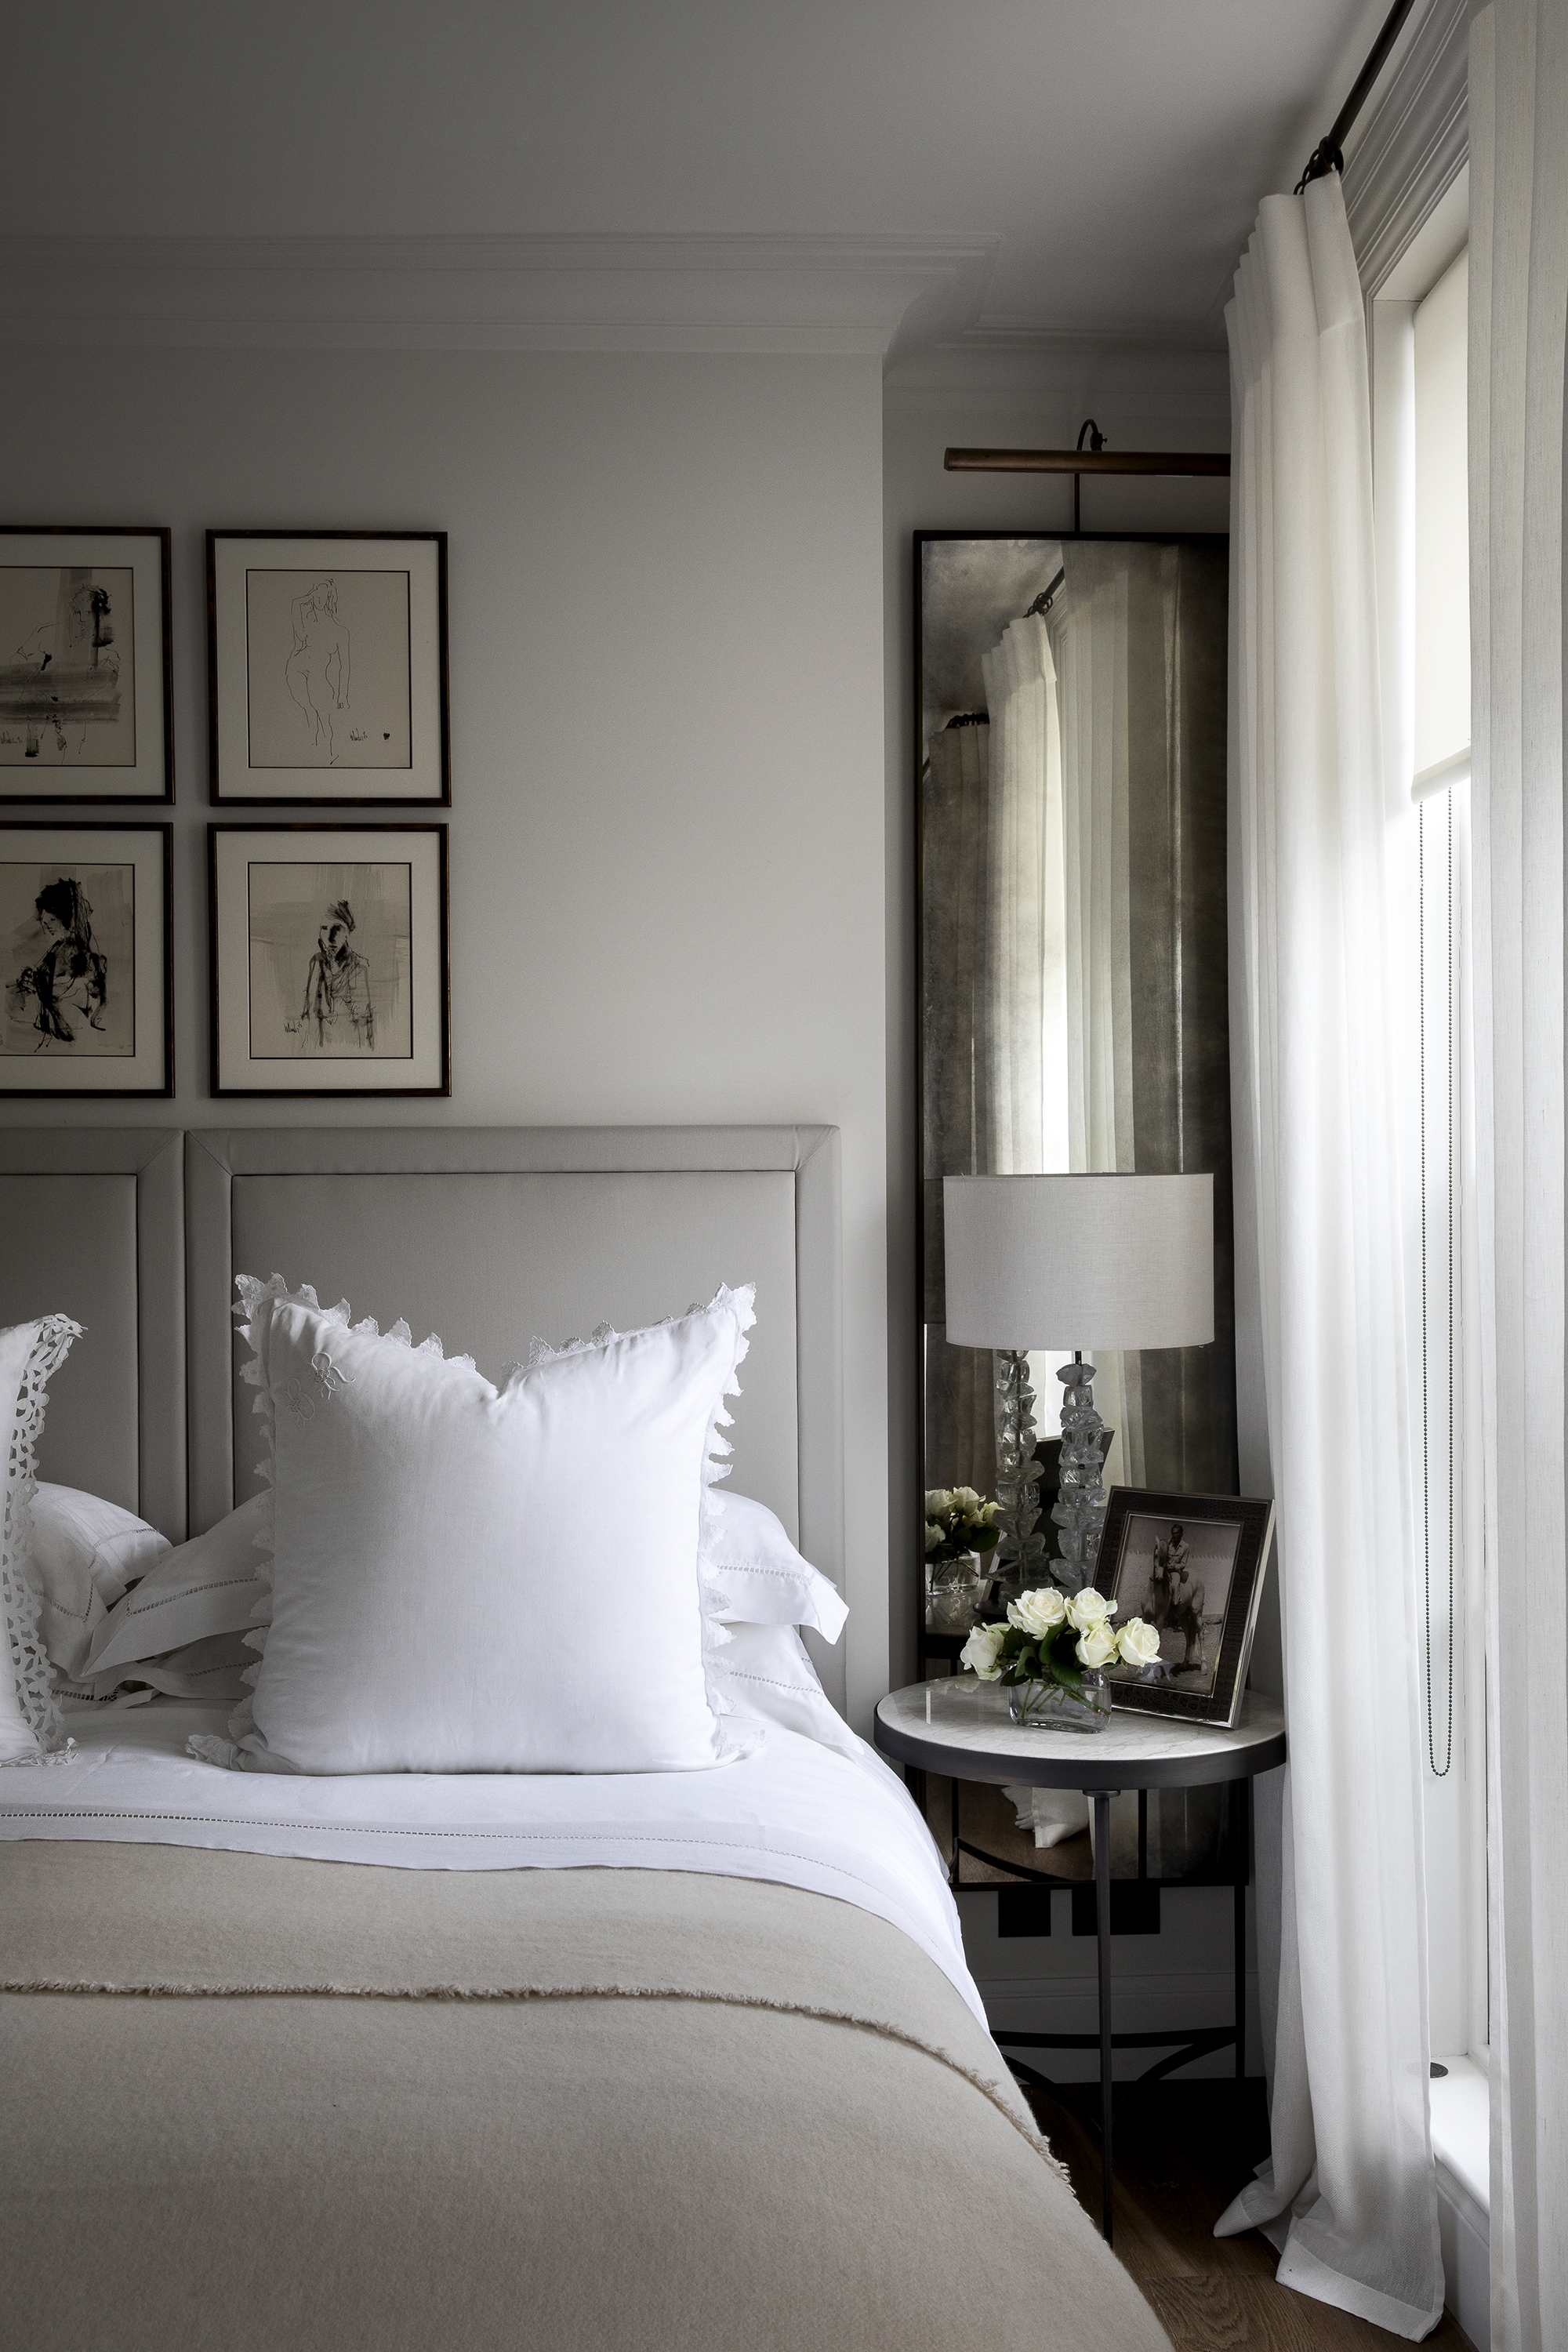 Light grey bedroom with grey headboard and mirrors in the alcoves